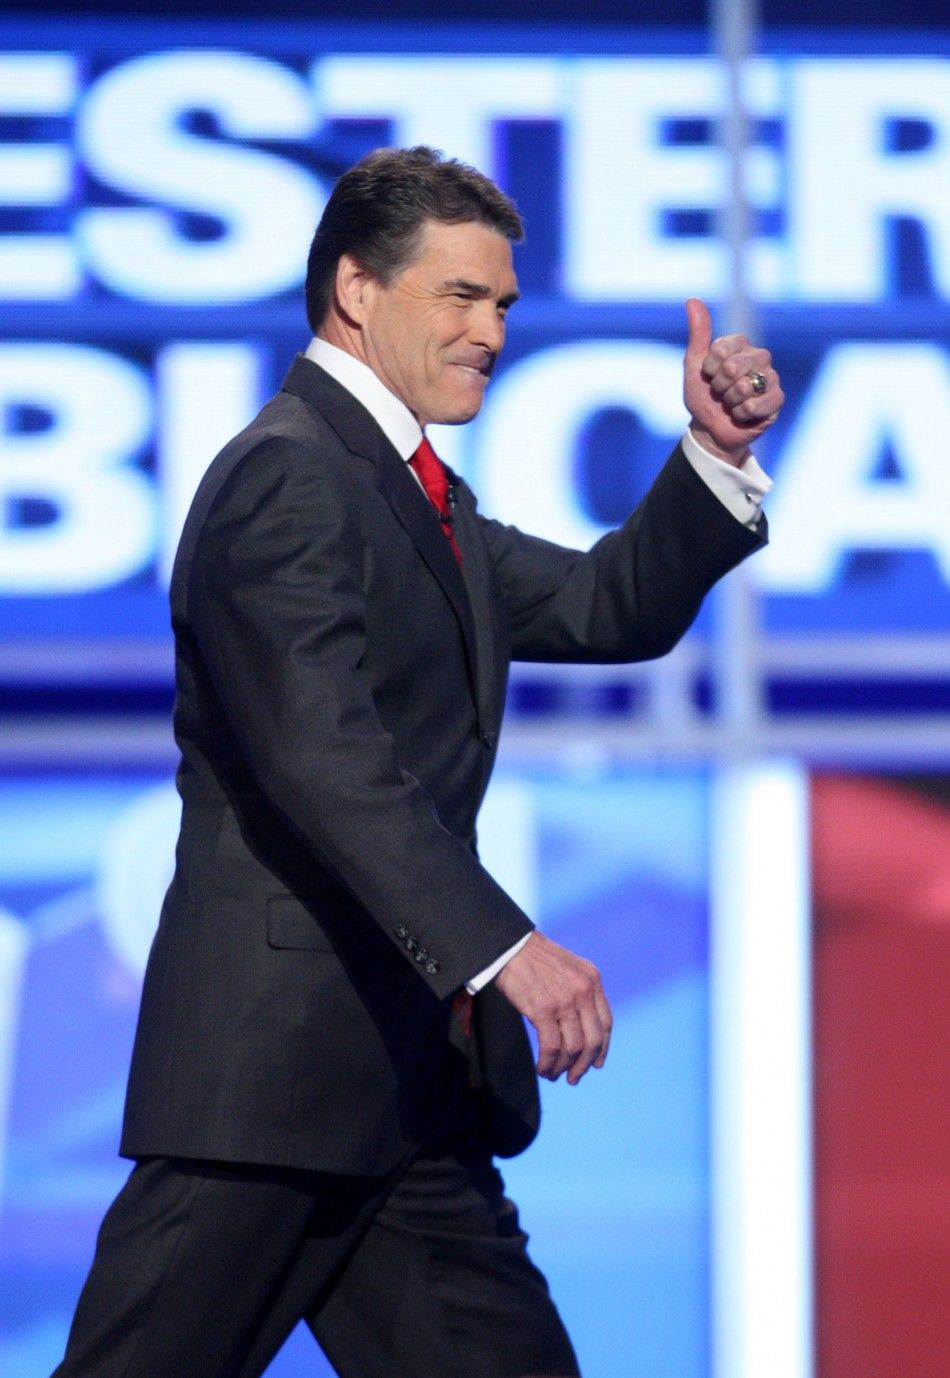 Republican presidential candidate Texas Governor Rick Perry arrives for the start of the CNN Western Republican presidential debate in Las Vegas, Nevada, October 18, 2011.